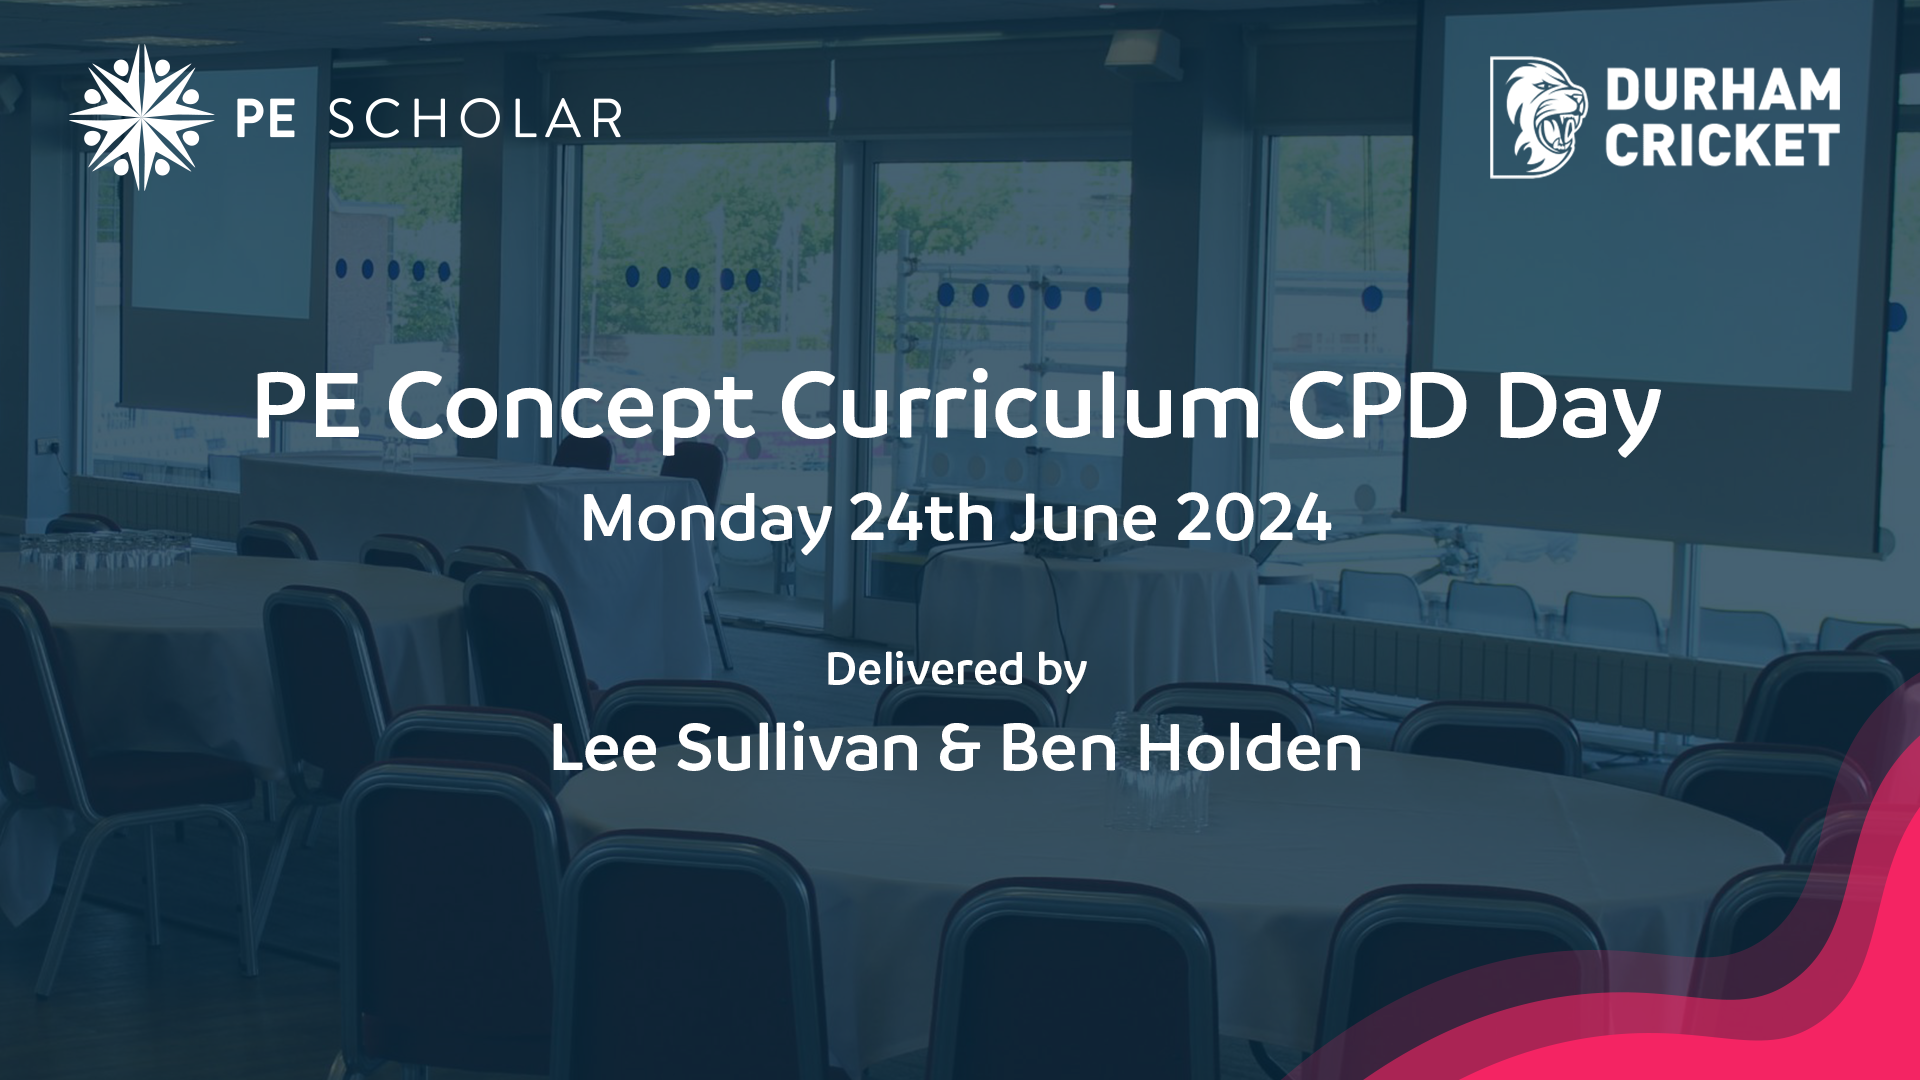 PE Concept Curriculum CPD Day